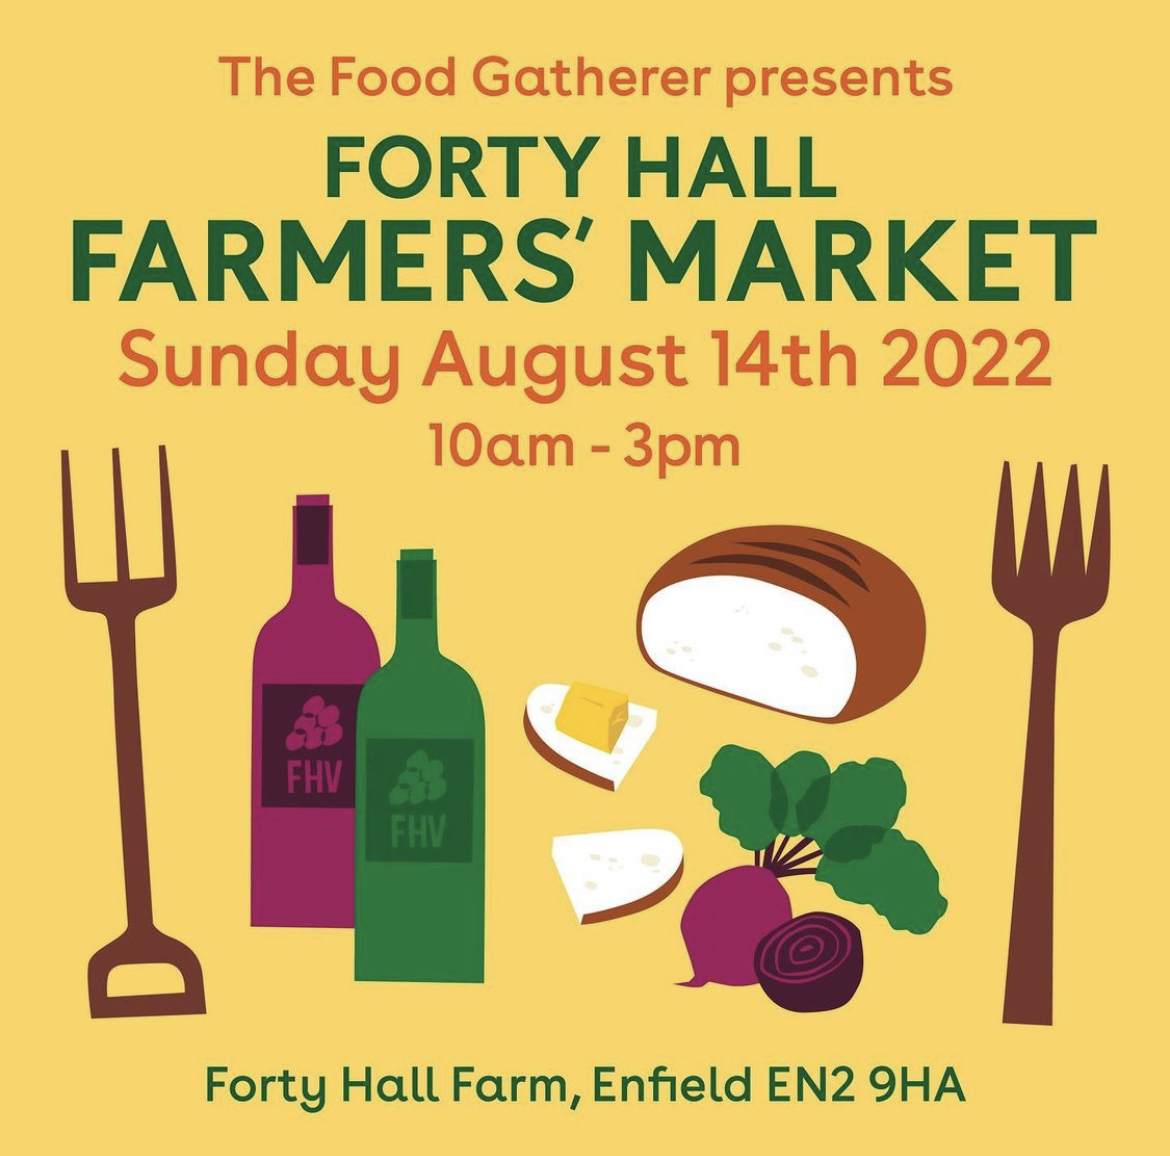 The @fortyhallfarm Farmers' Market is back this Sunday from 10am to 3pm! Come along and stock up on great local produce, try out delicious street food and visit some of the Farm's animals. We look forward to seeing you there!| @FoodGatherer hubs.ly/Q01jqRBl0